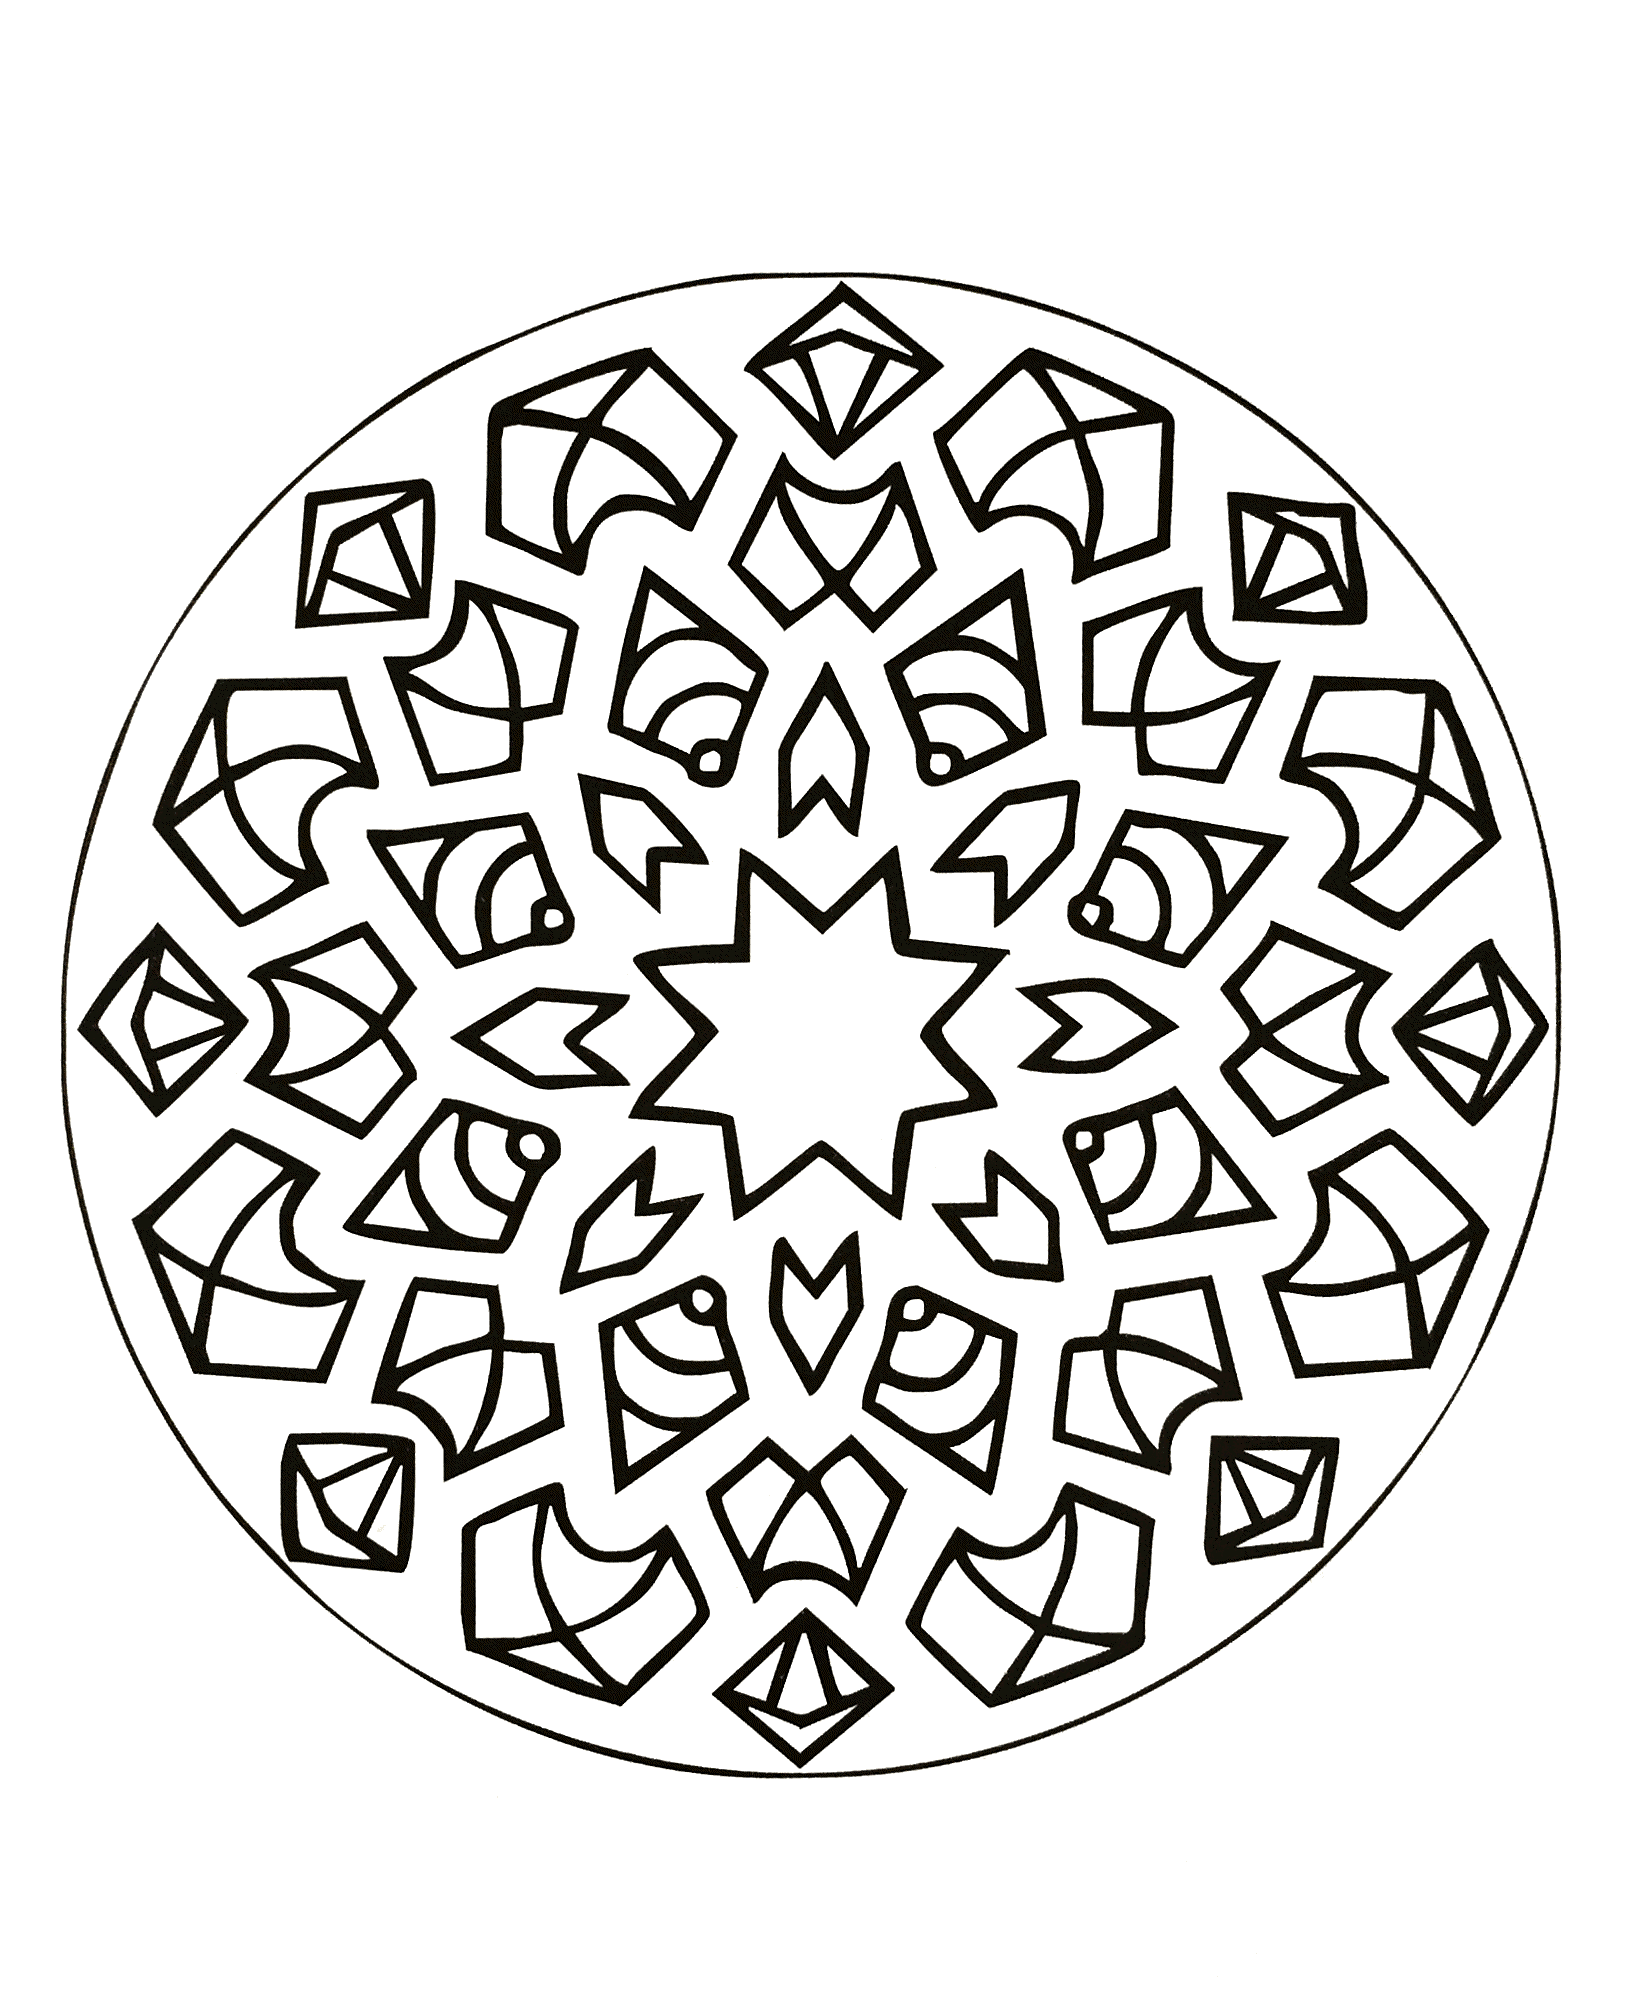 A Mandala guaranteed 100% Relaxation ... coloring a mandala helps you connect with your inner self, bring out your most creative side, and lower your heart rate and blood pressure.